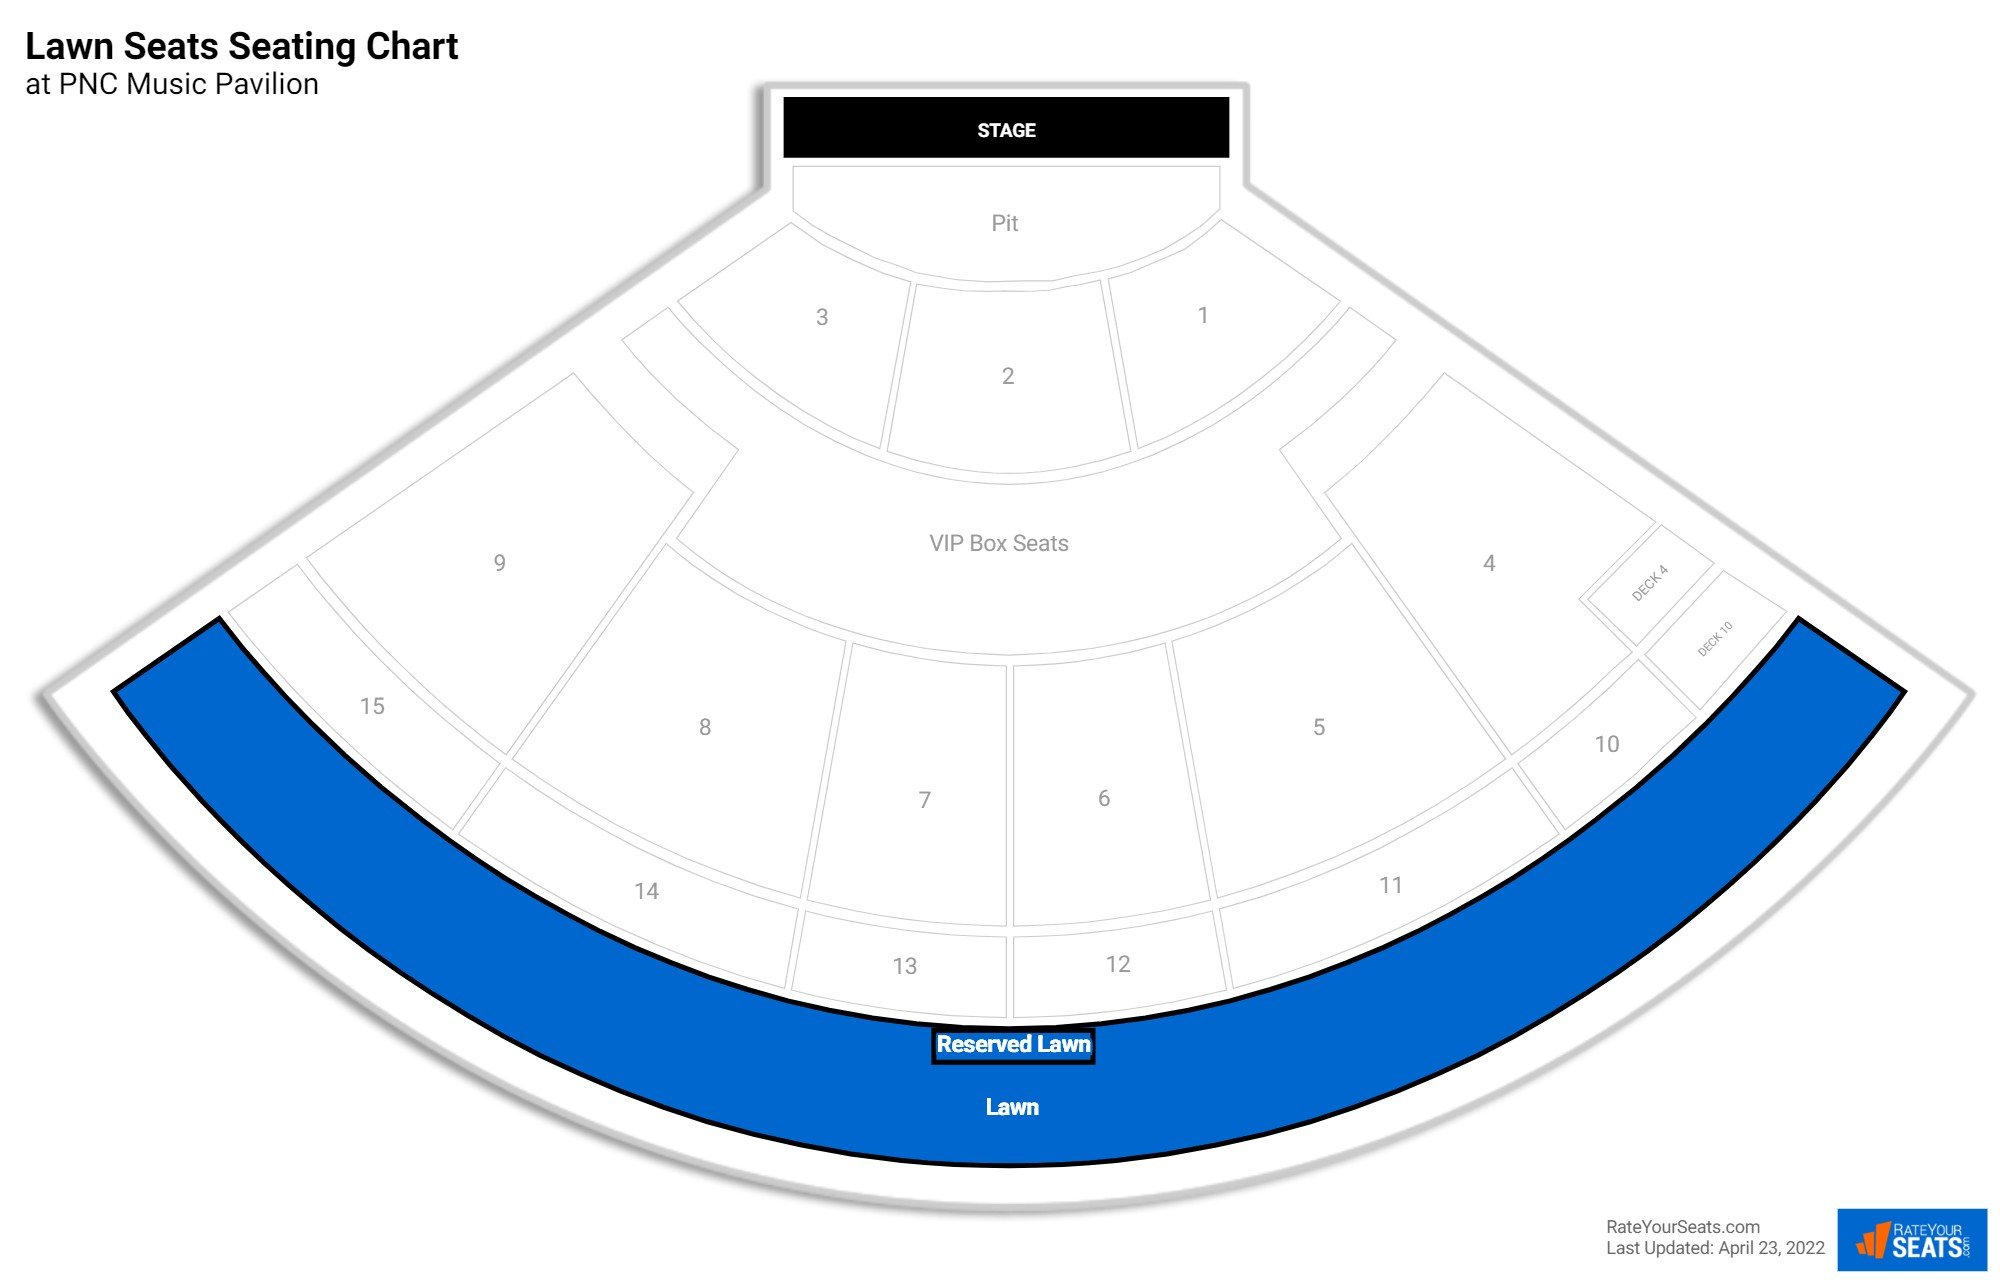 Concert Lawn Seats Seating Chart at PNC Music Pavilion